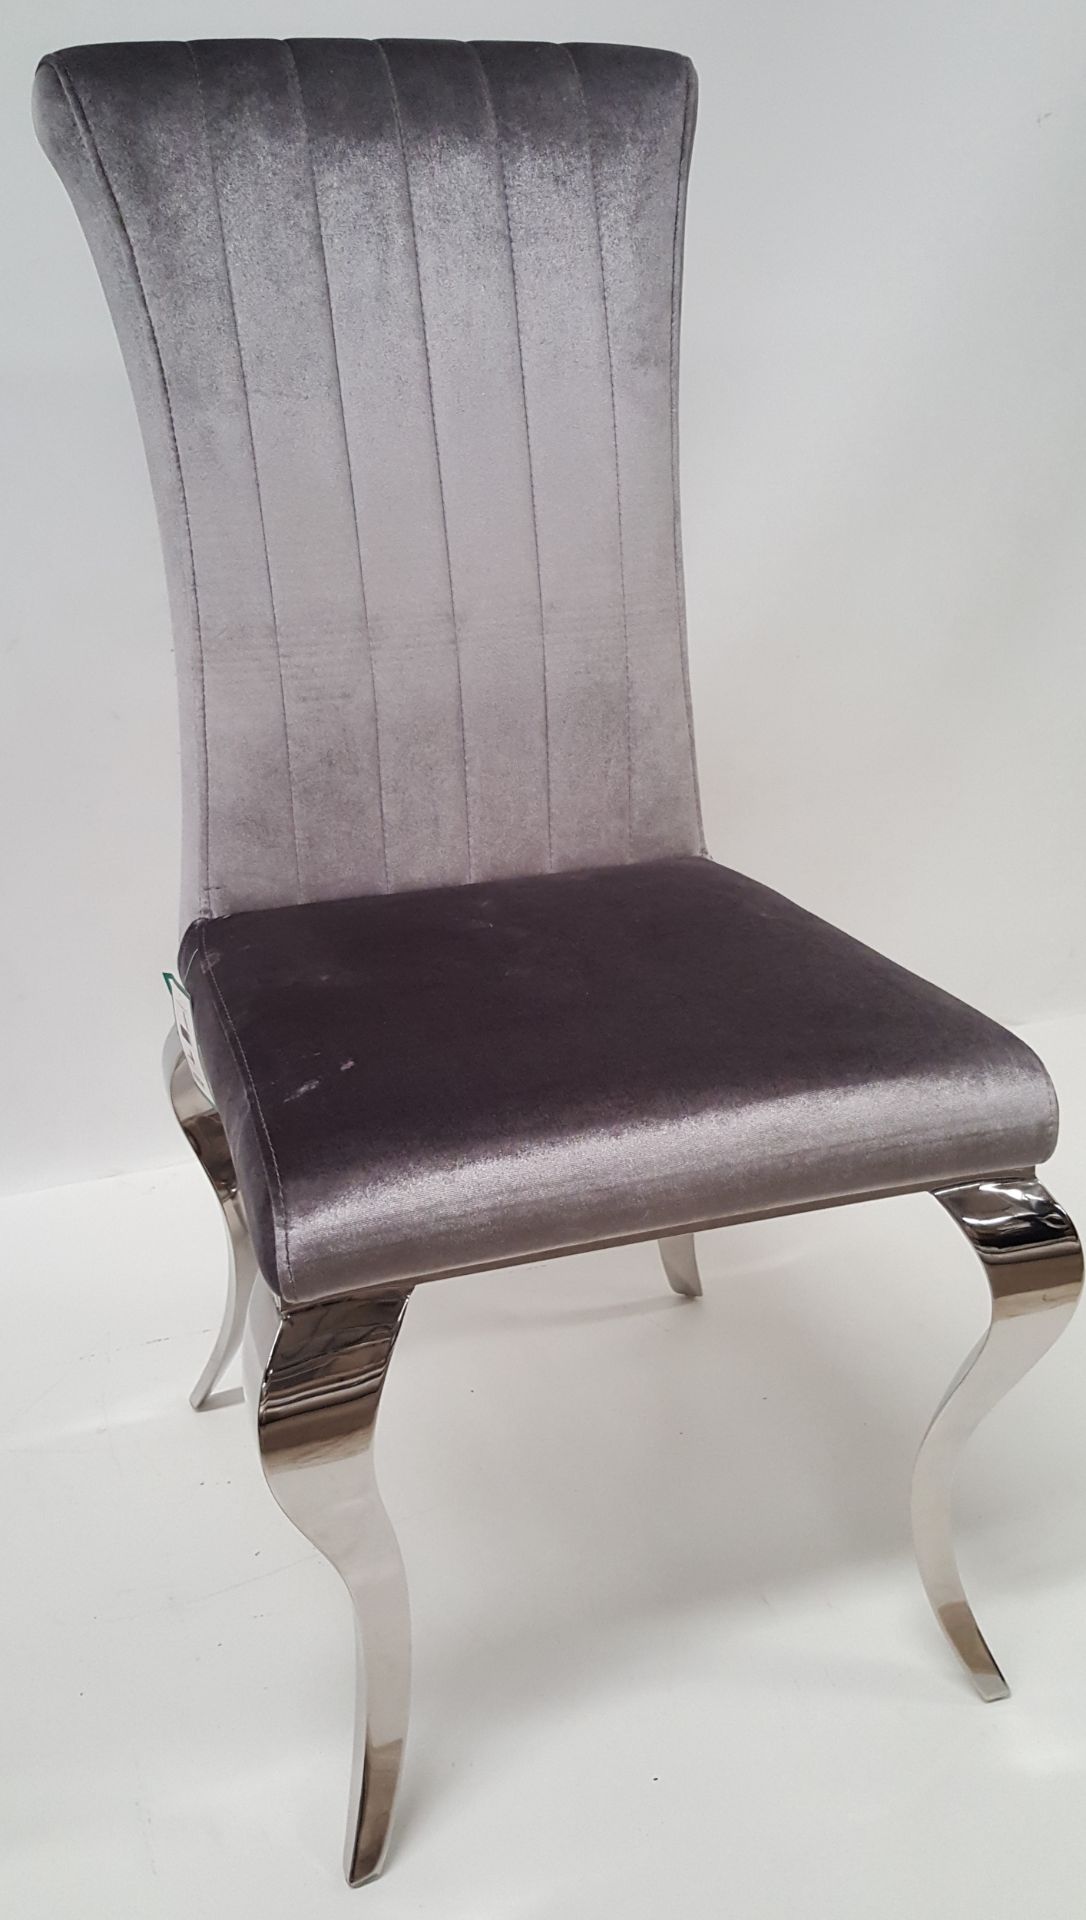 4 x STYLISH SILVER PLUSH VELOUR DRESSING/DINING TABLE CHAIRS - CL408 - Location: Altrincham WA14